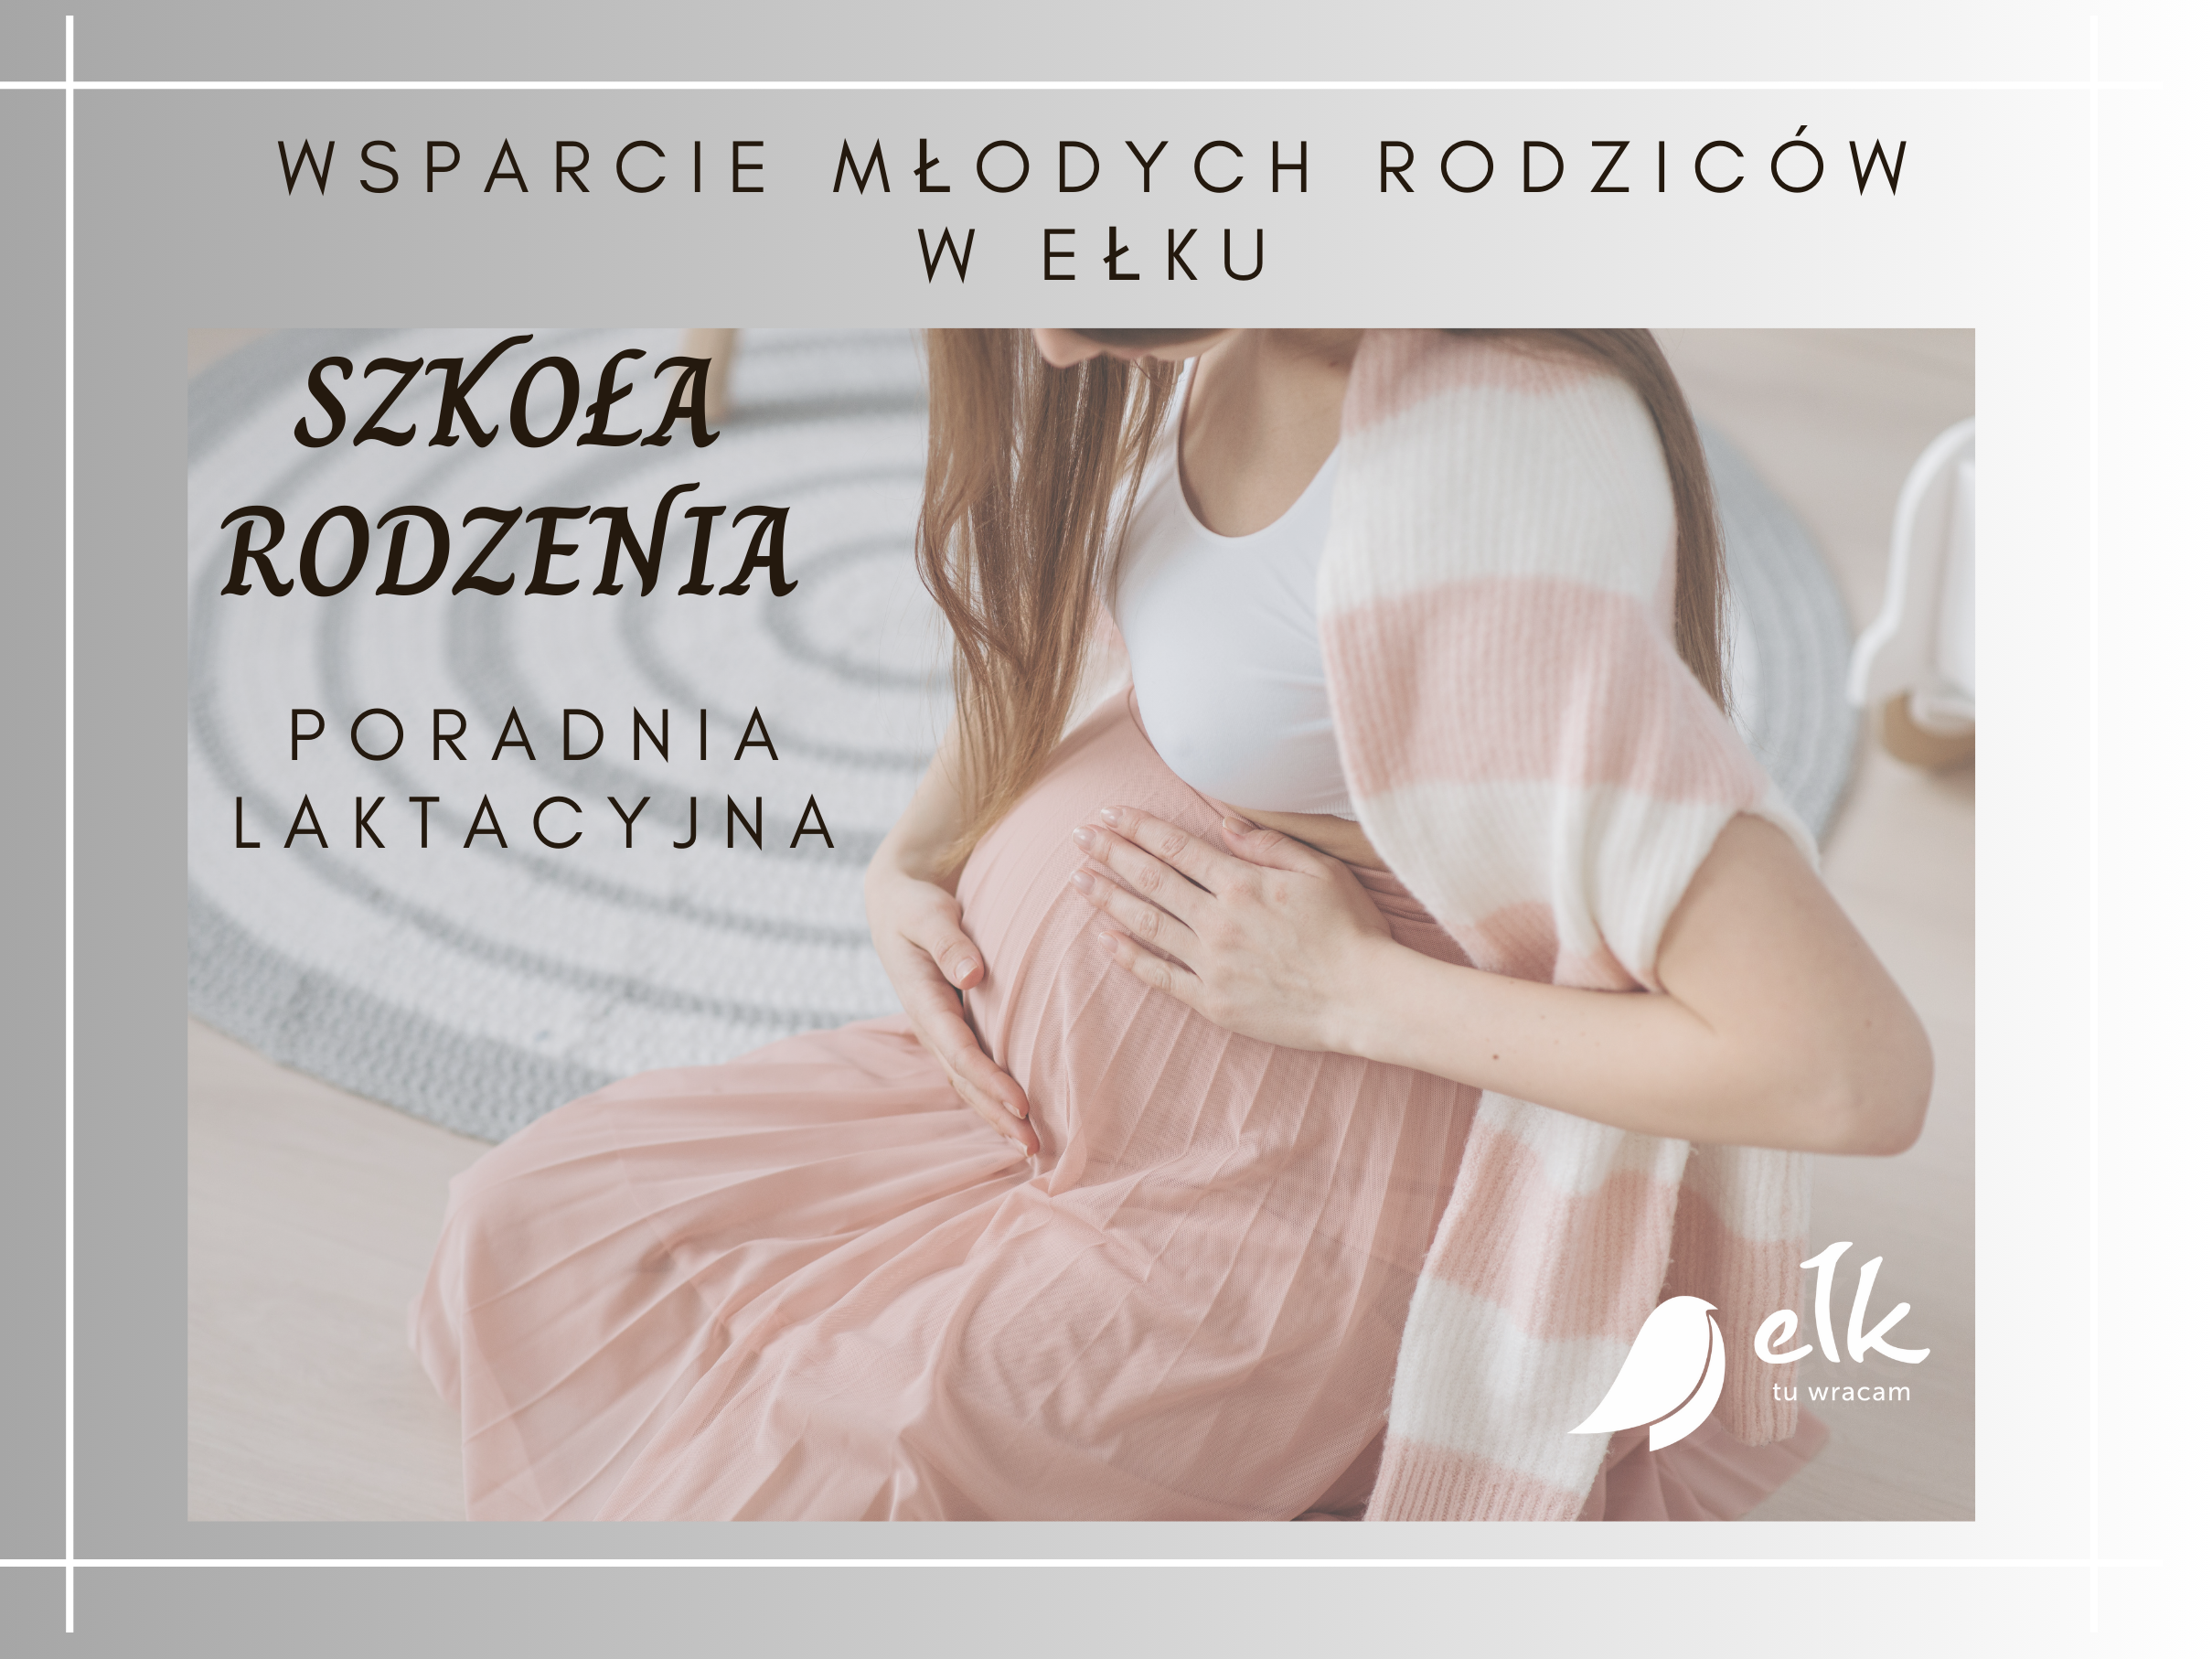 Another year in which the local government of Ełk supports young parents